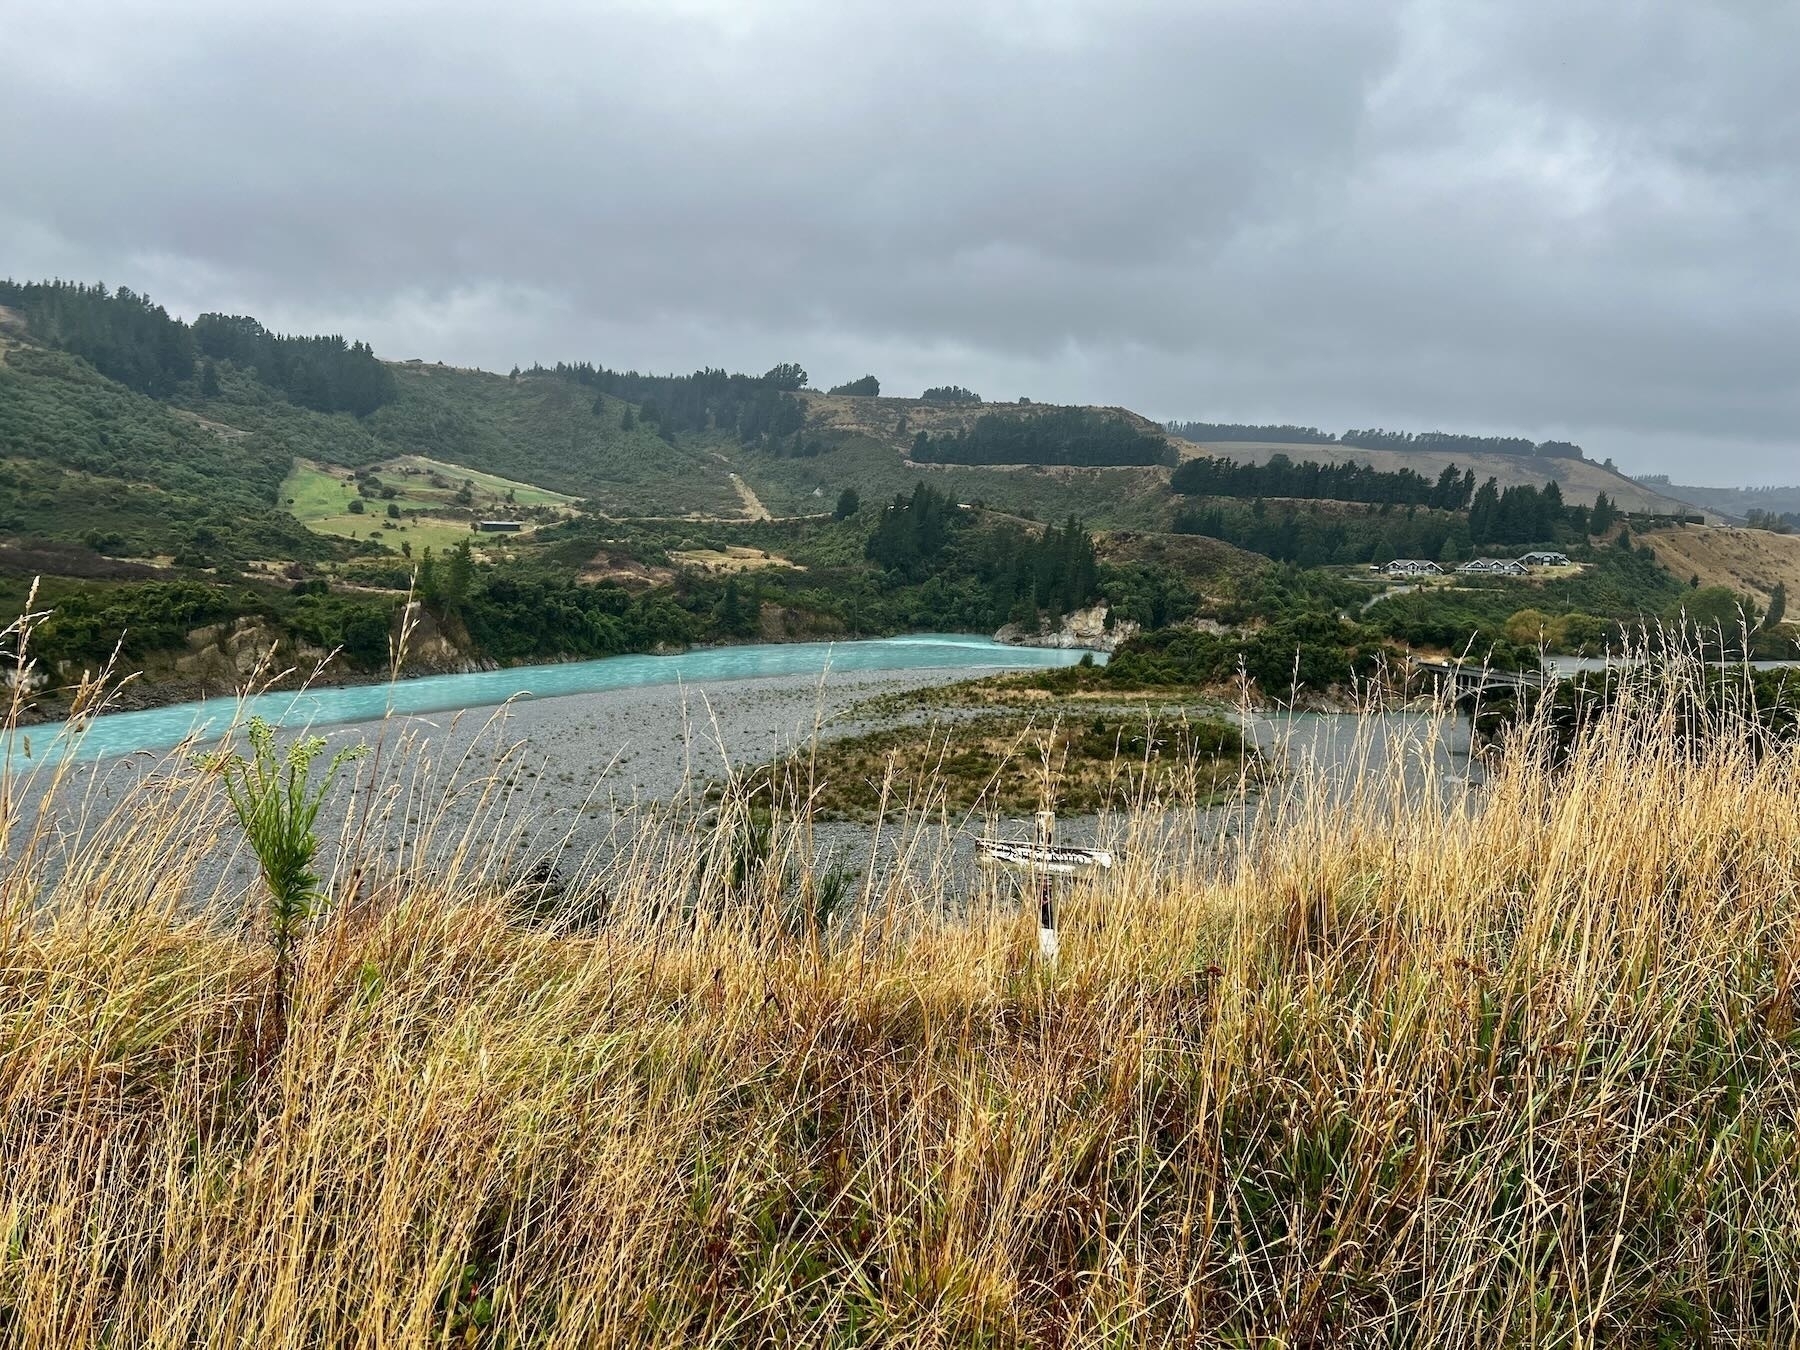 Rakaia Gorge - blue river below green hills with golden grass in the foreground.